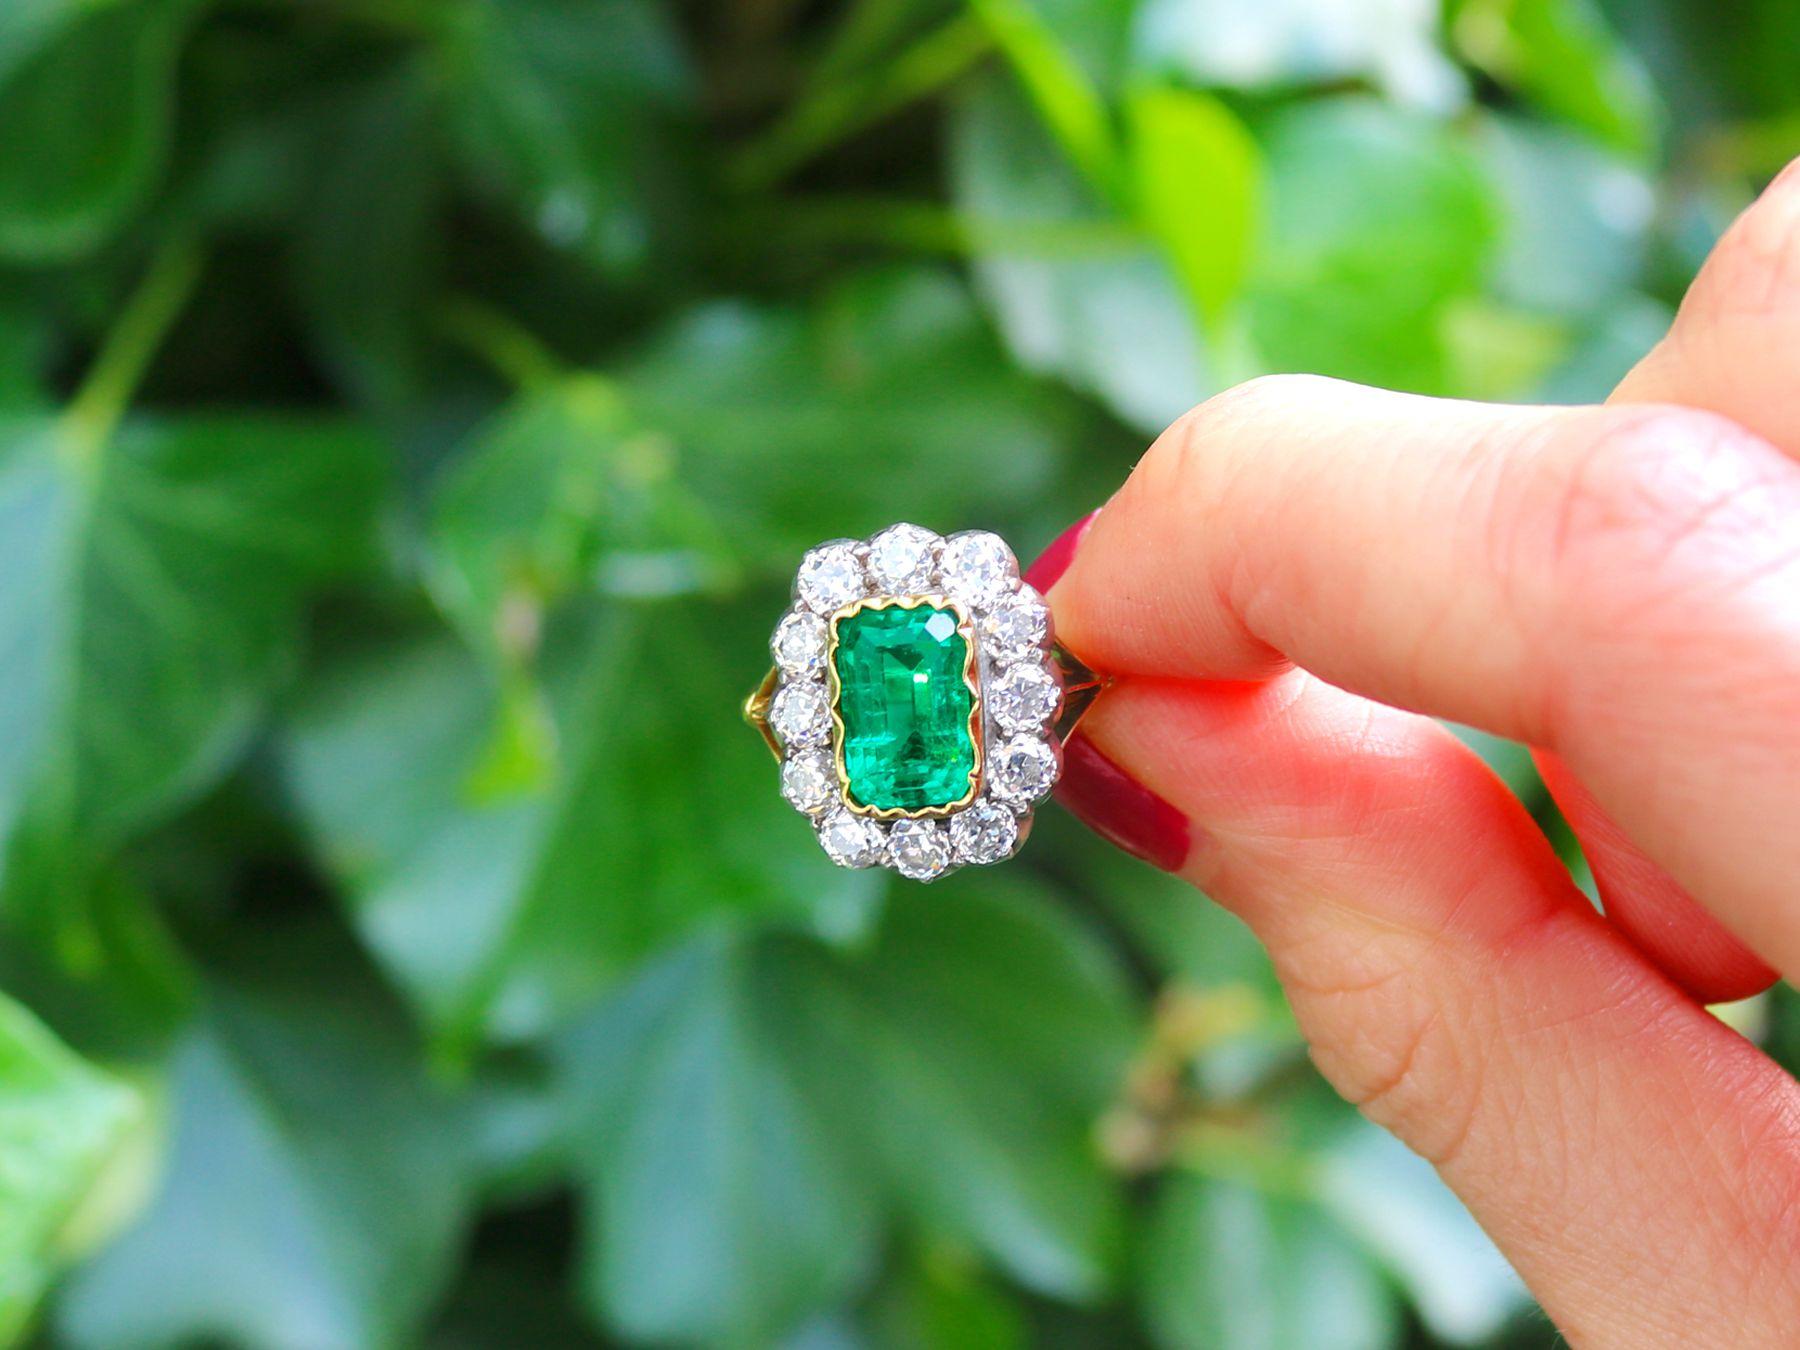 A stunning and impressive 2 carat Colombian emerald and 2.2 carat diamond, 18 karat yellow and white gold cocktail ring; part of our diverse gemstone jewelry collections

This stunning, fine and impressive antique Colombian emerald ring has been